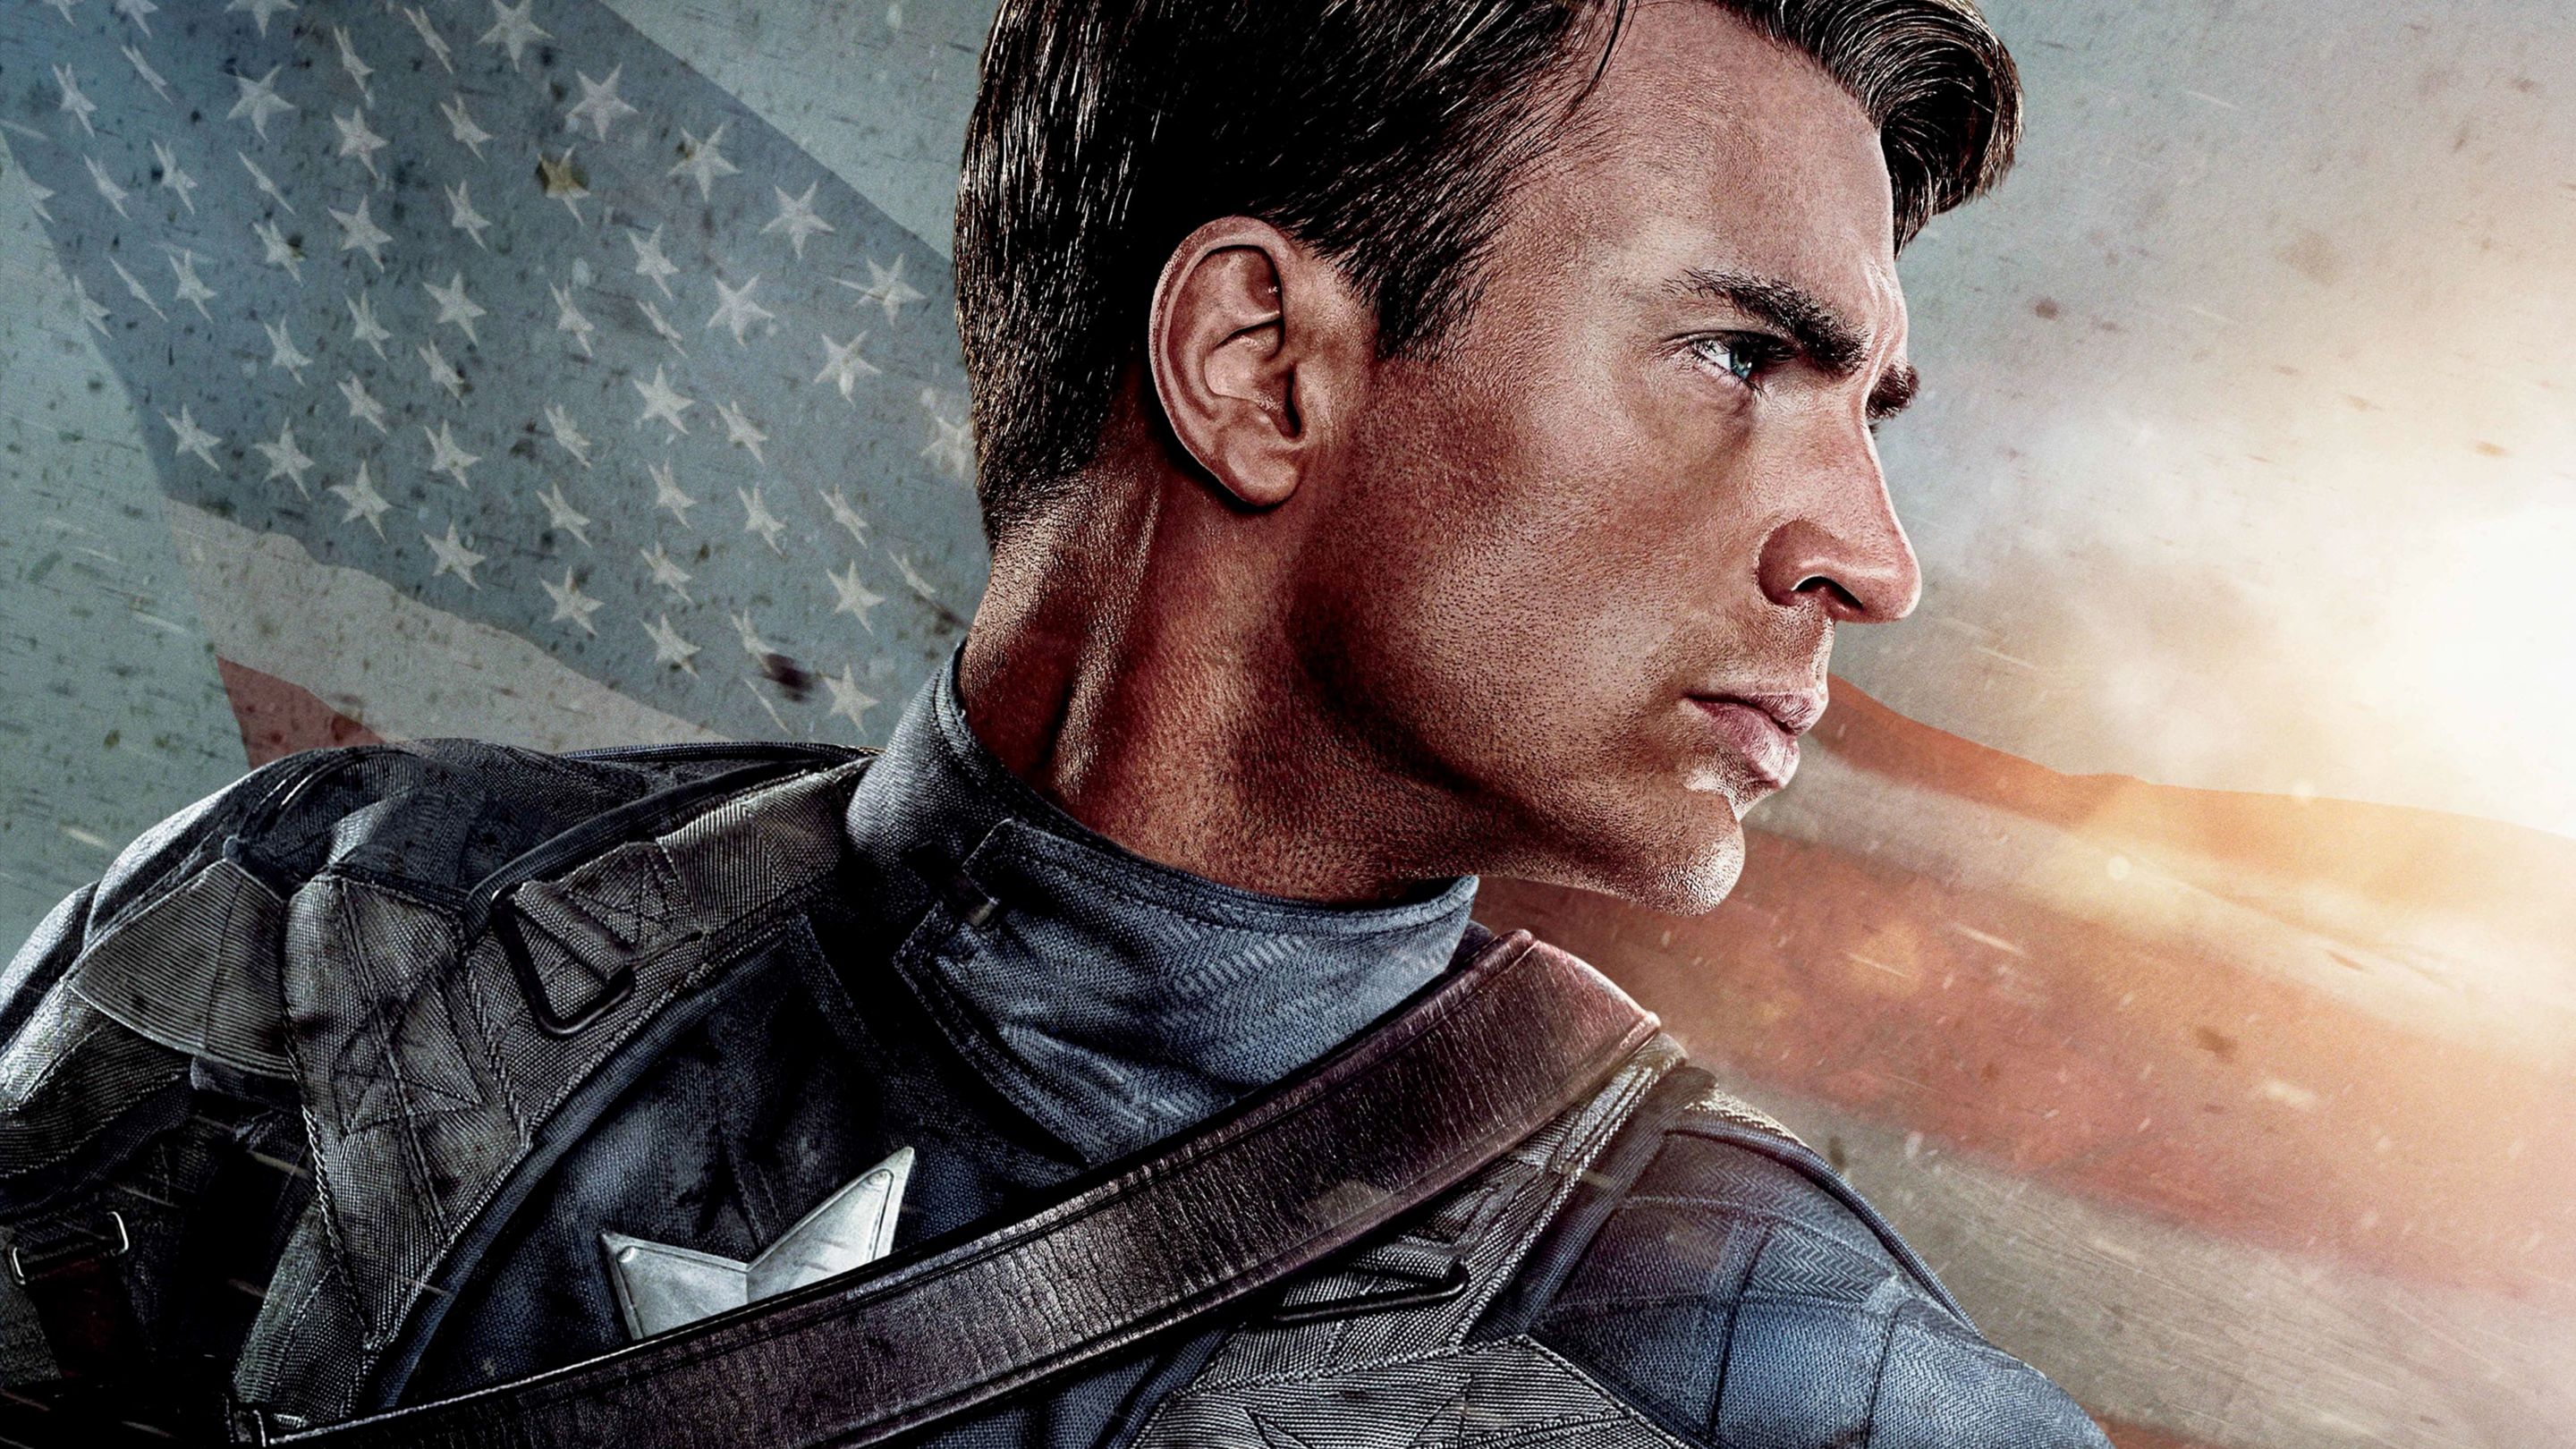 watch captain america full movie online for free